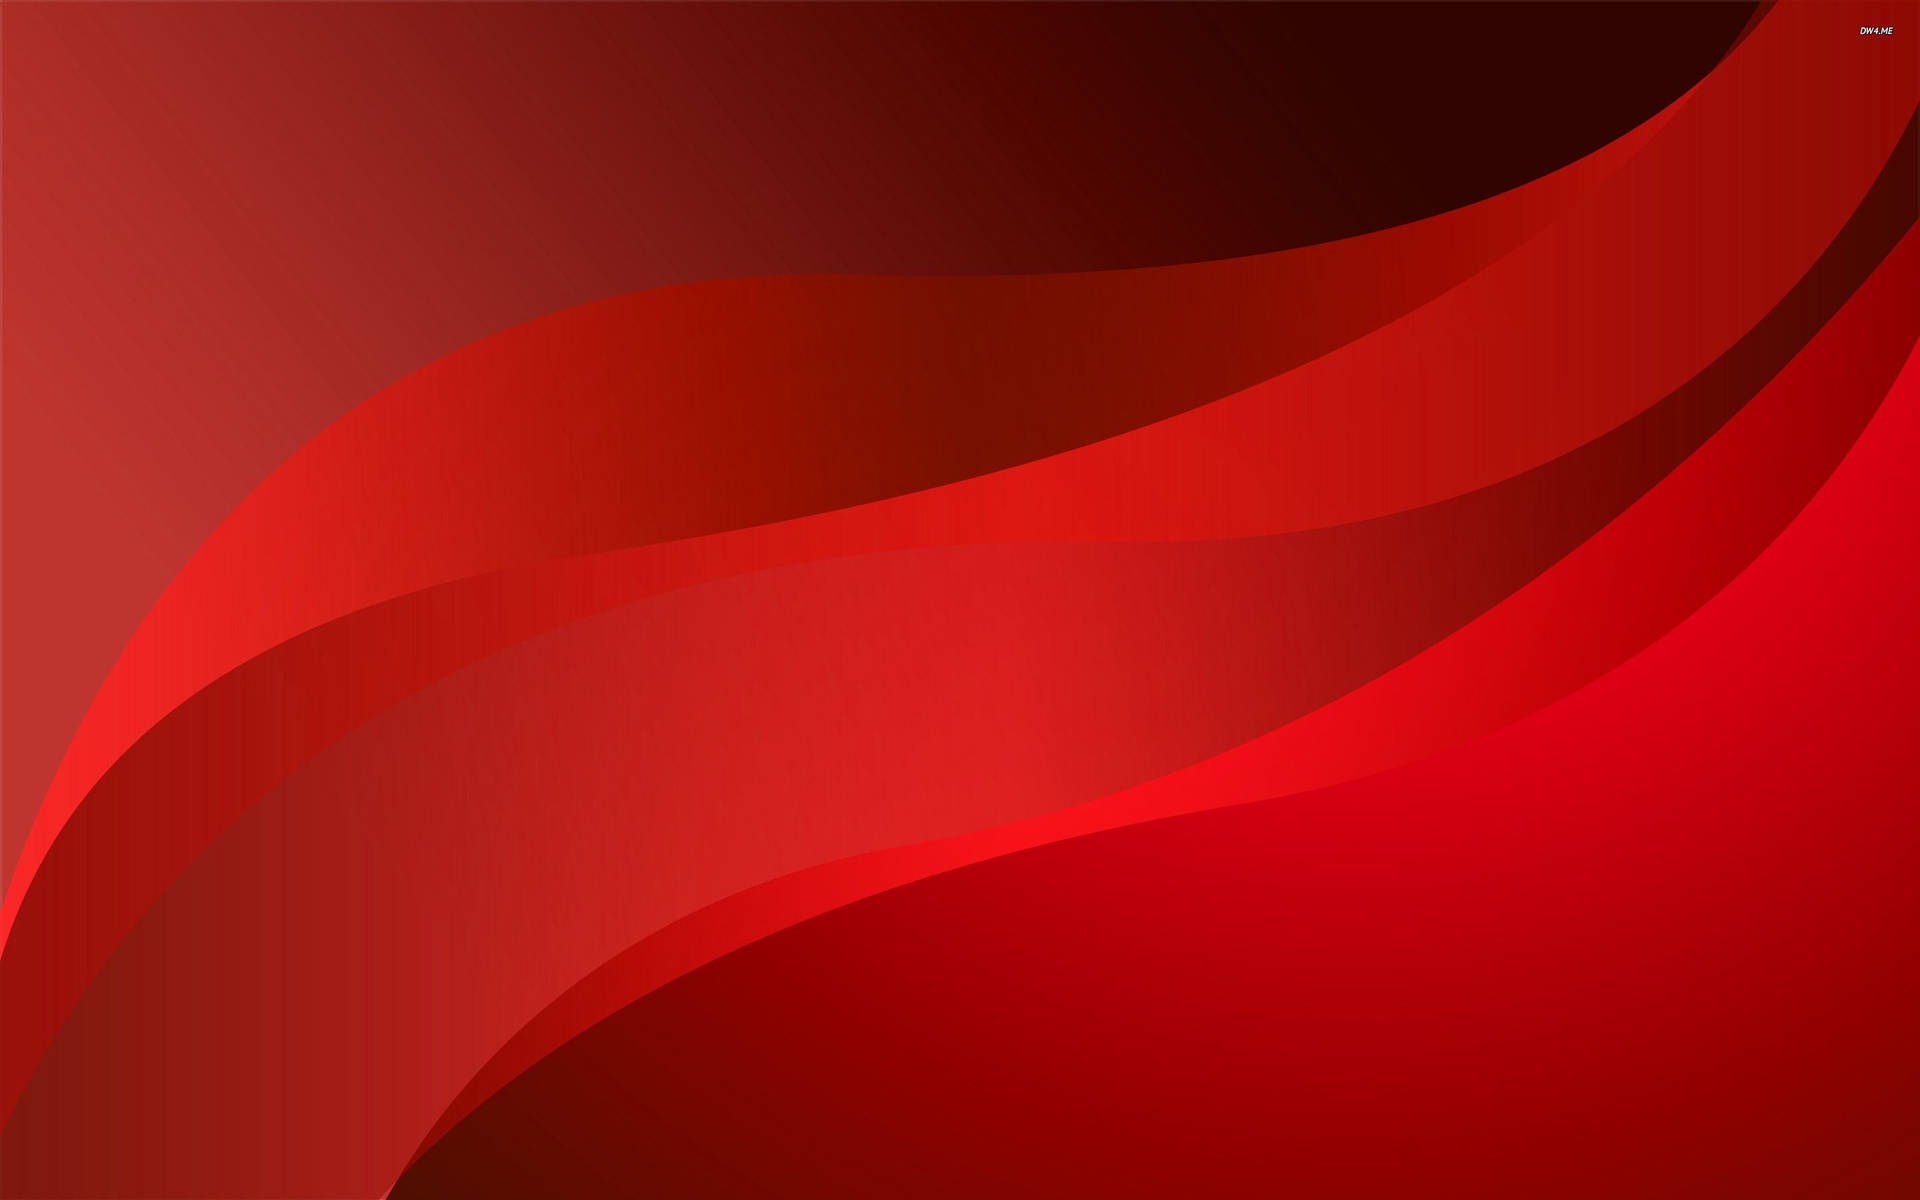 Red Abstract Curved Lines Wallpaper